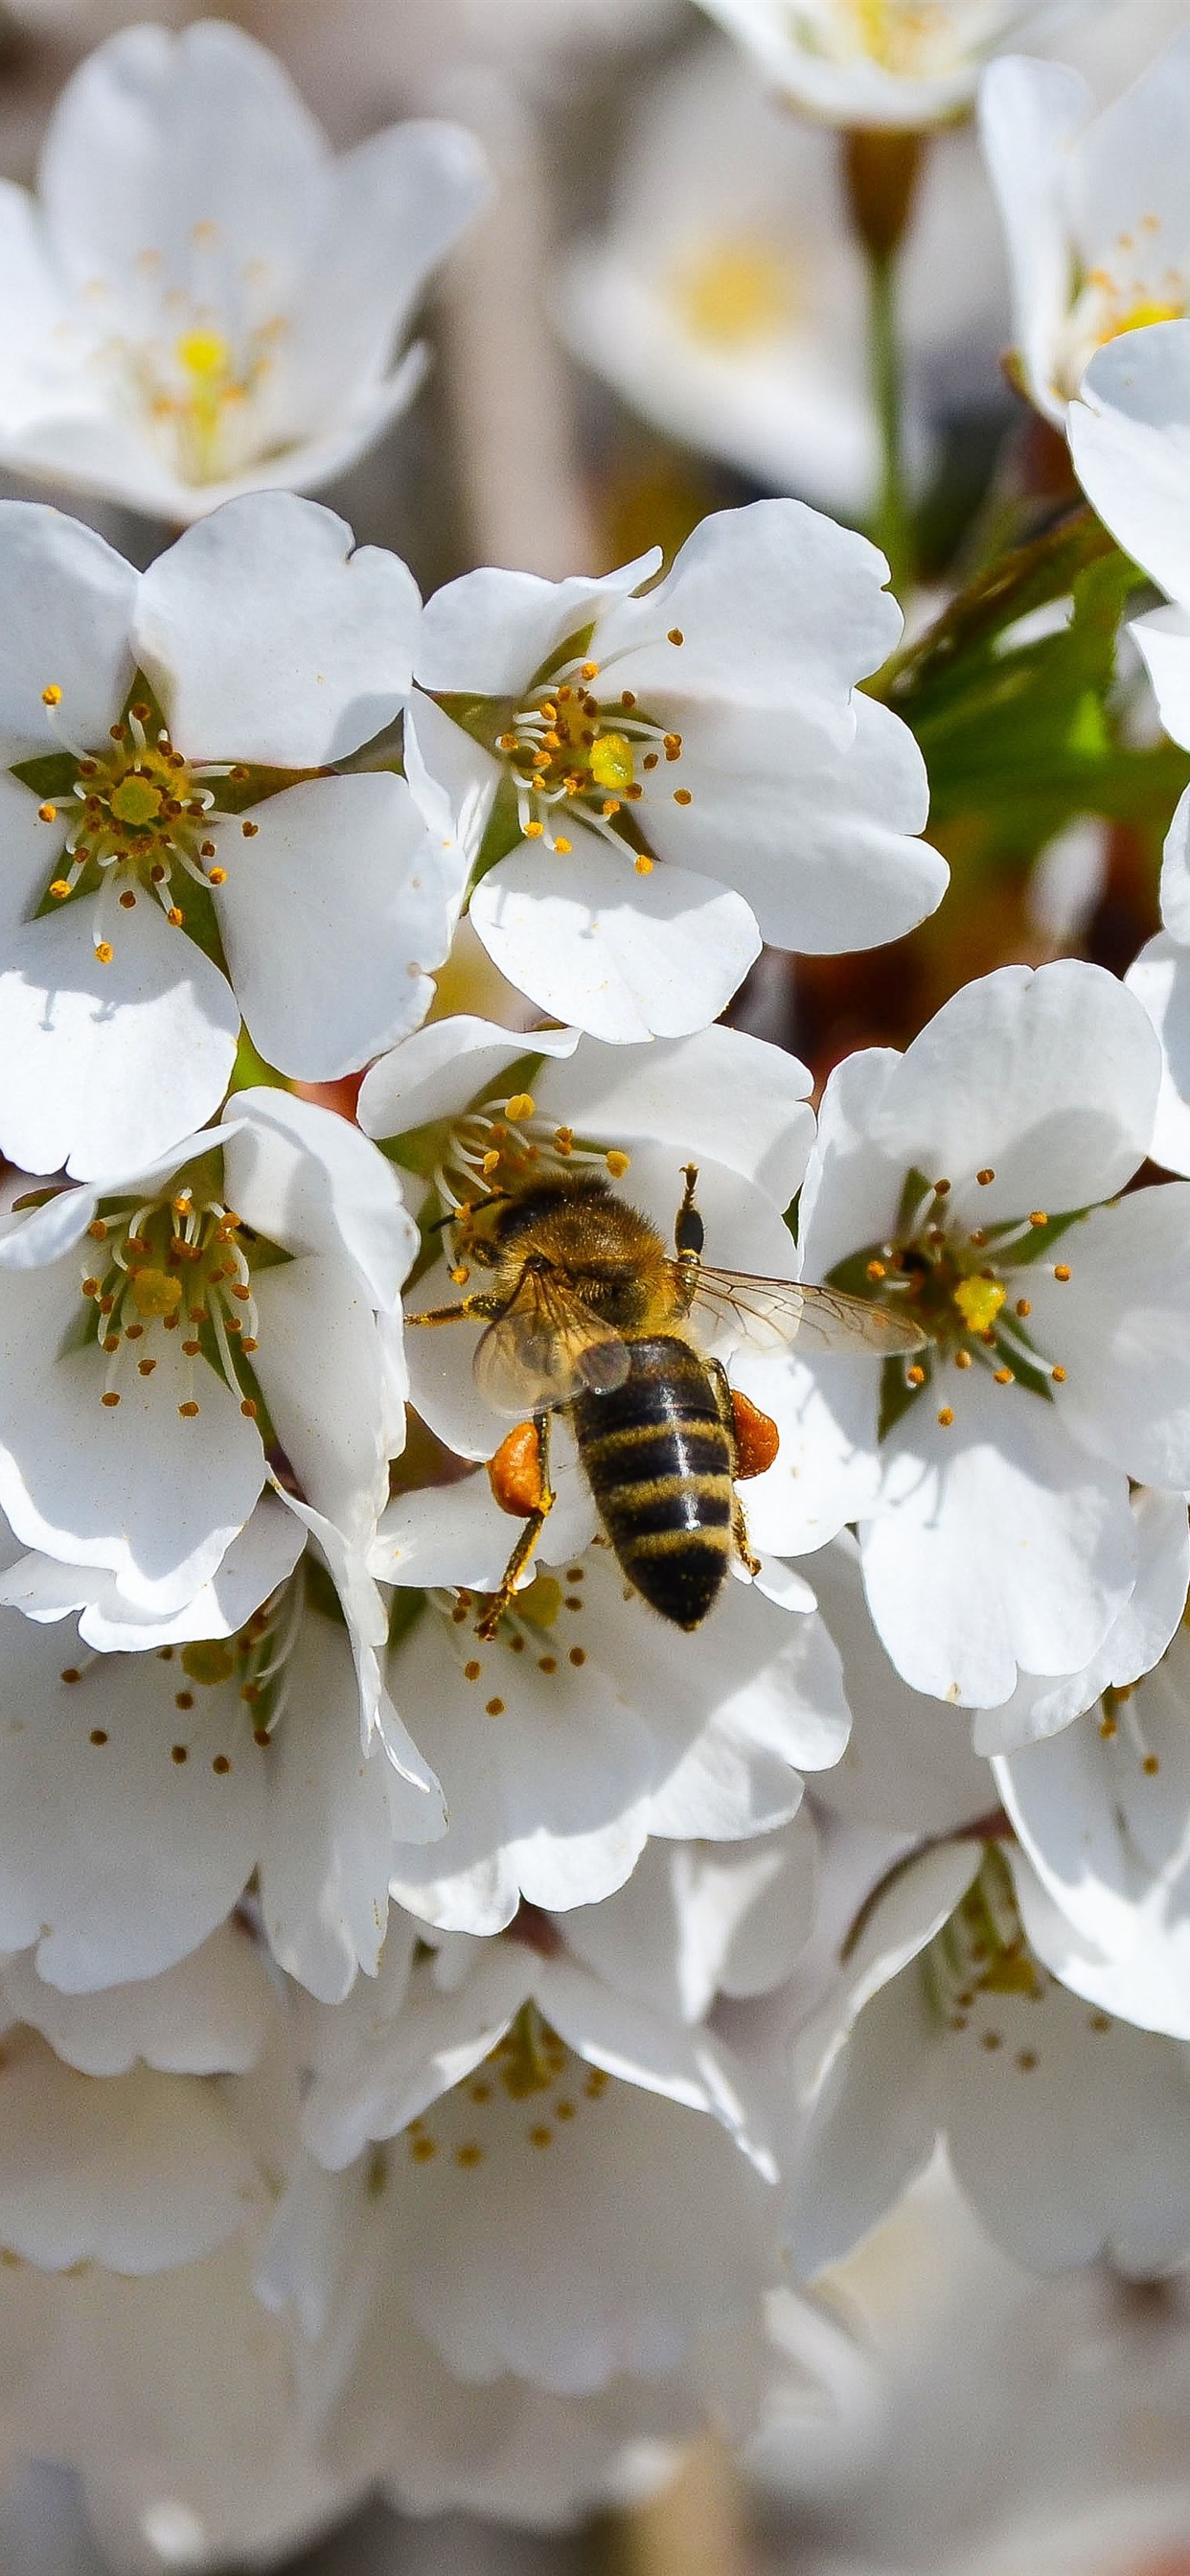 White Flowers, Bee, Spring 1242x2688 IPhone 11 Pro XS Max Wallpaper, Background, Picture, Image